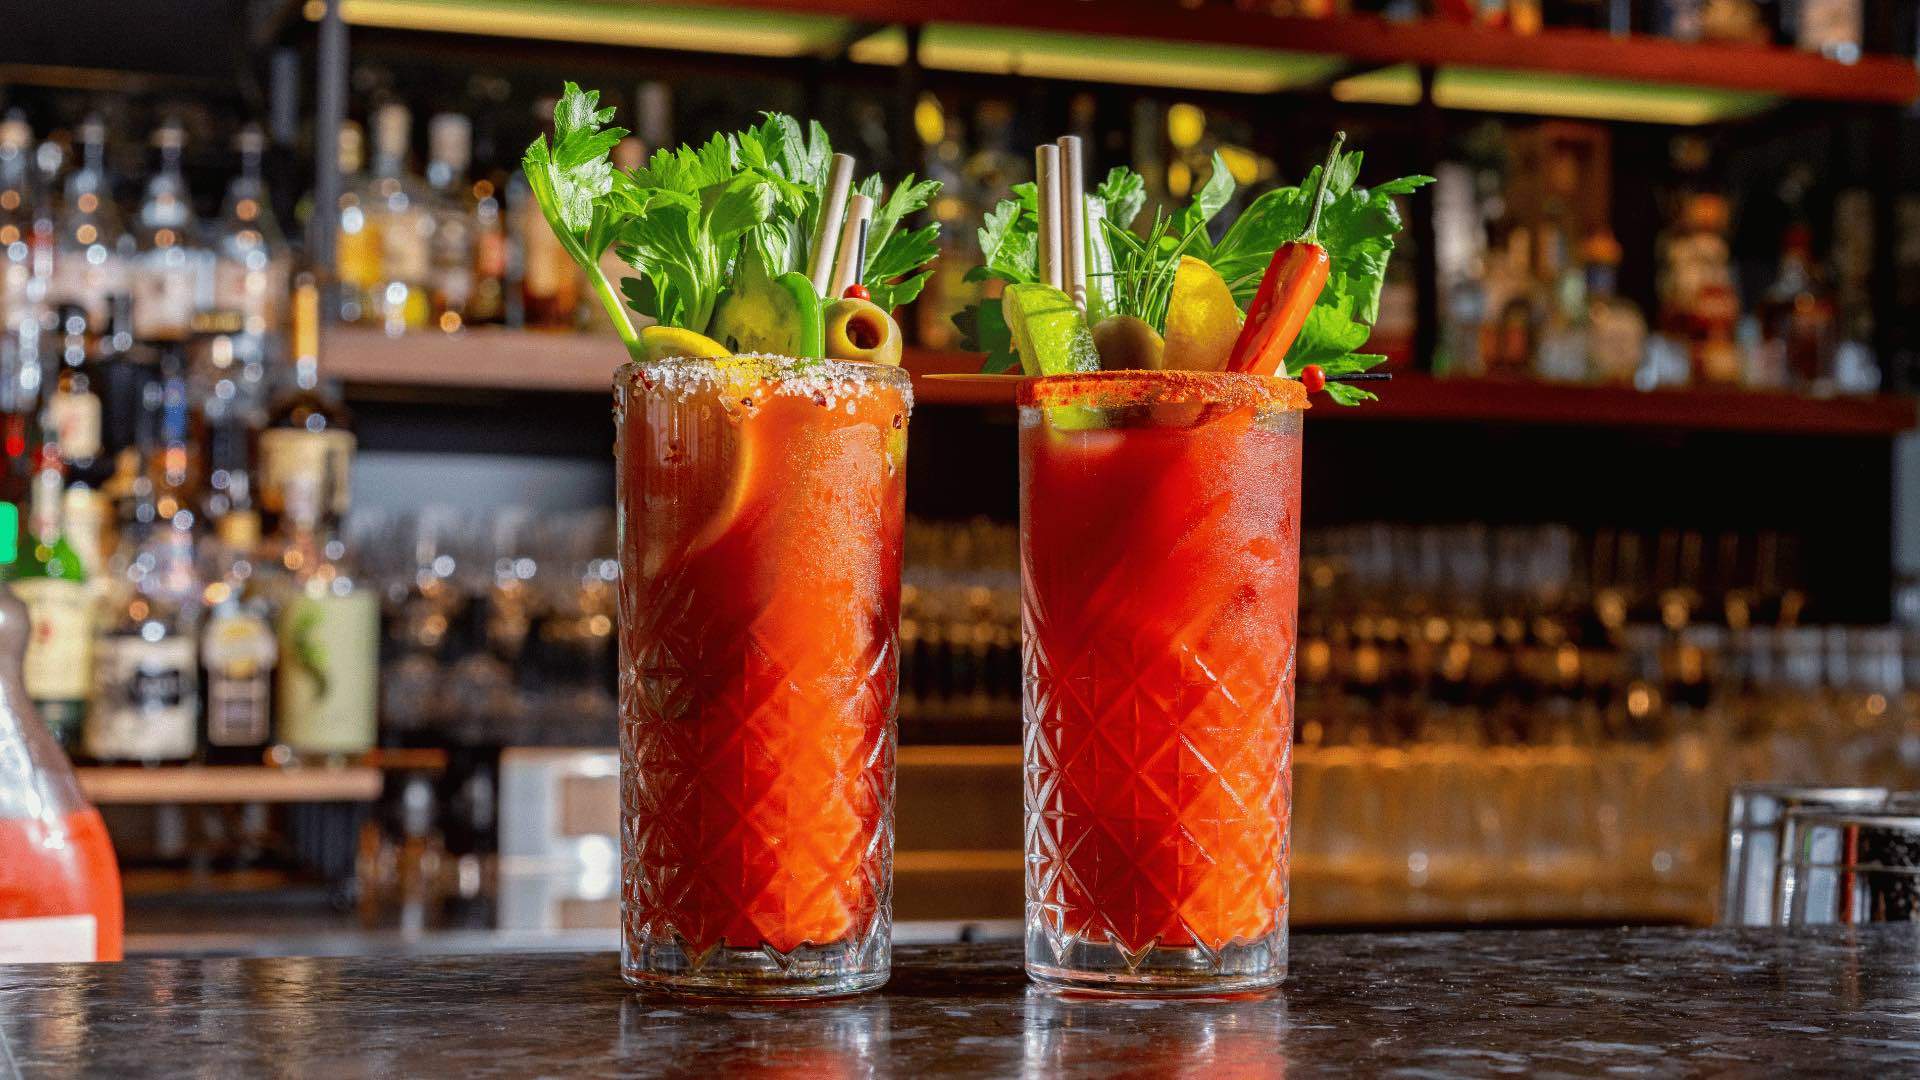 Two Bloody Marys at a bar.